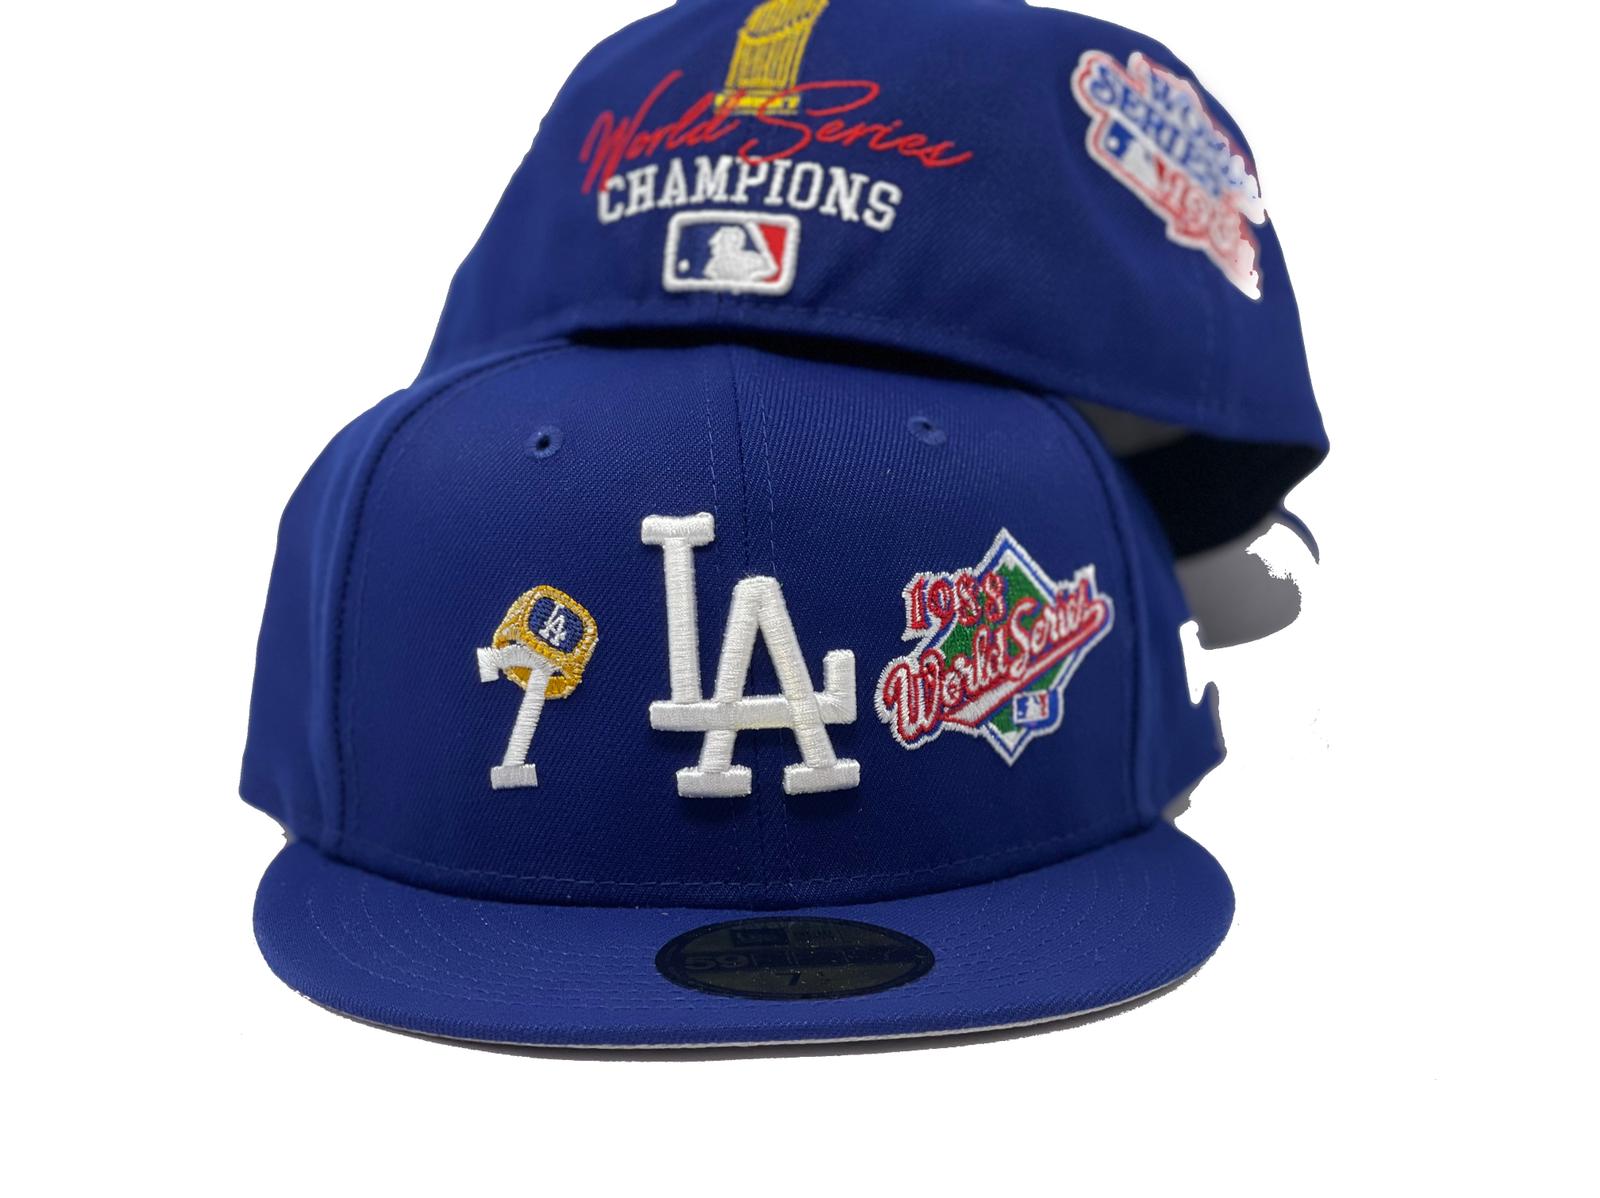 Los Angeles Dodgers 7x Champions Rose Crown New Era 59FIFTY Blue